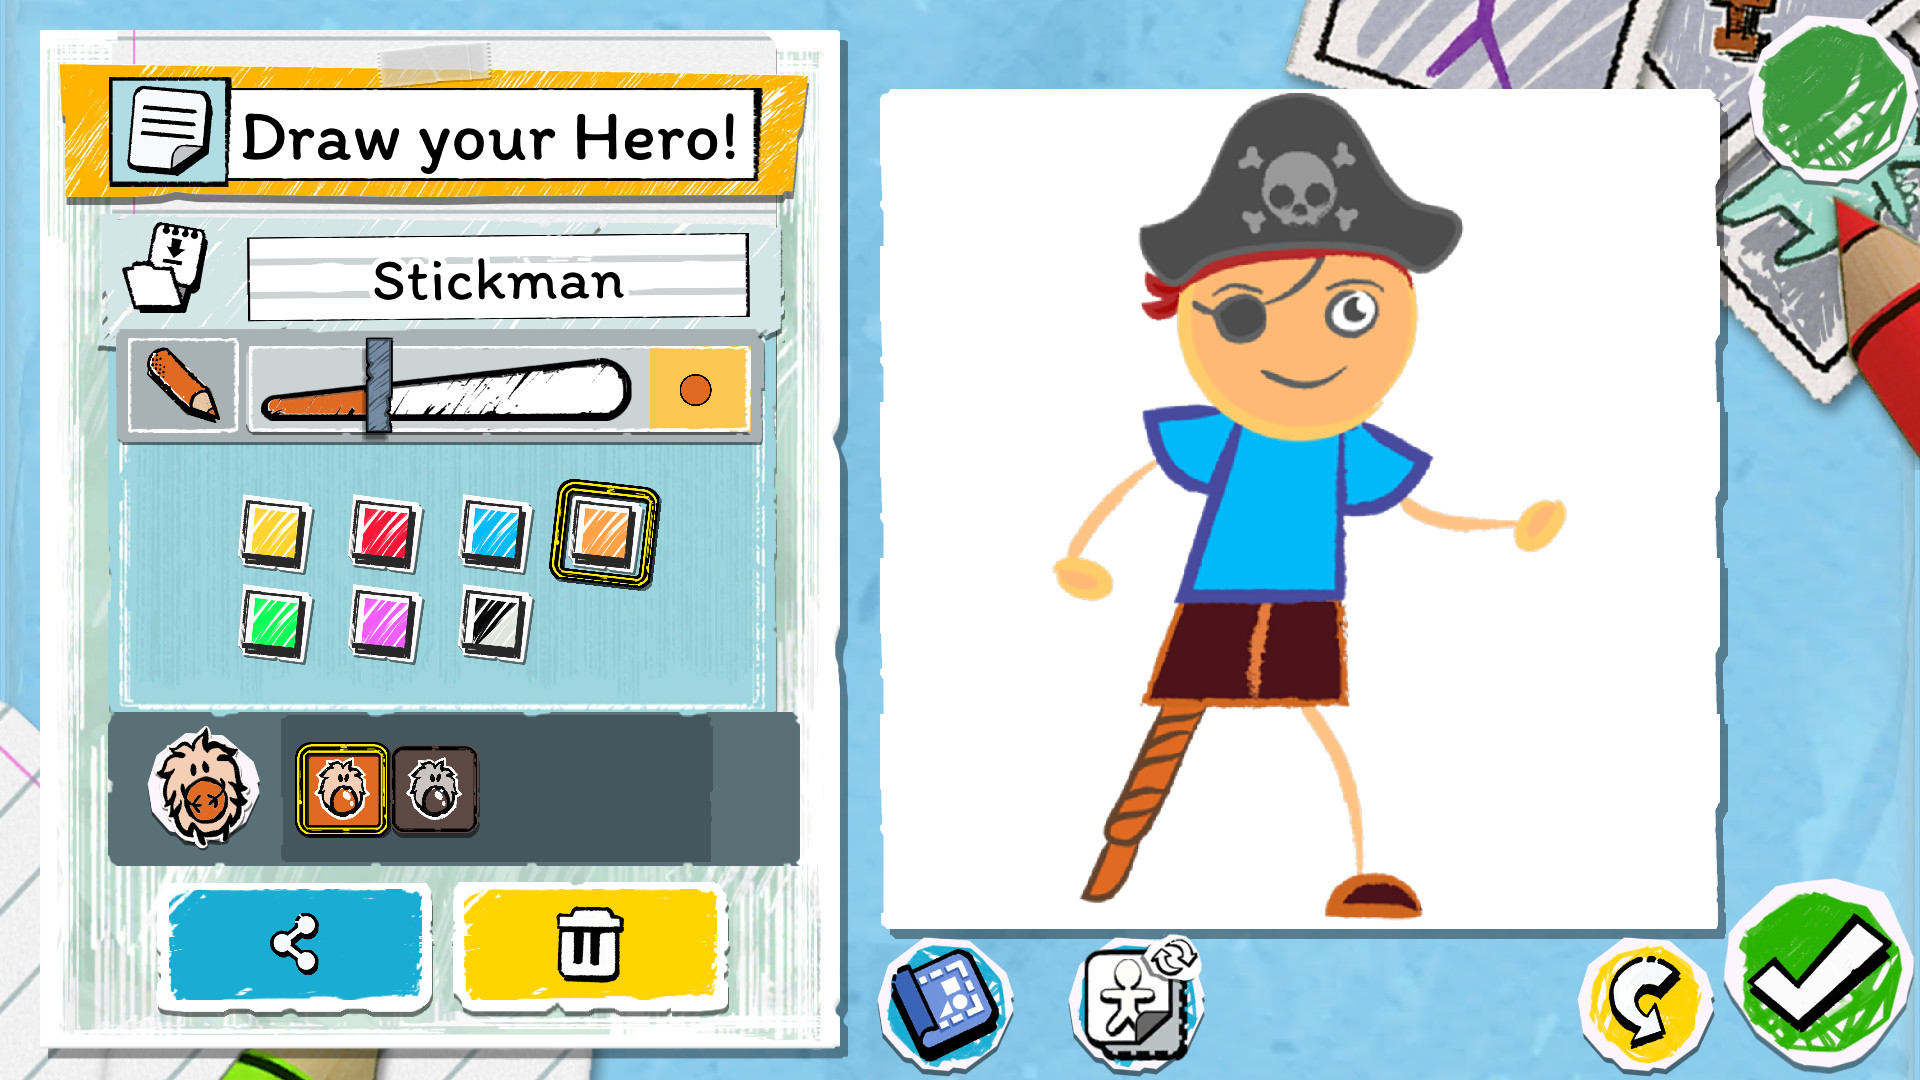 Find the best computers for Draw a Stickman: EPIC 3